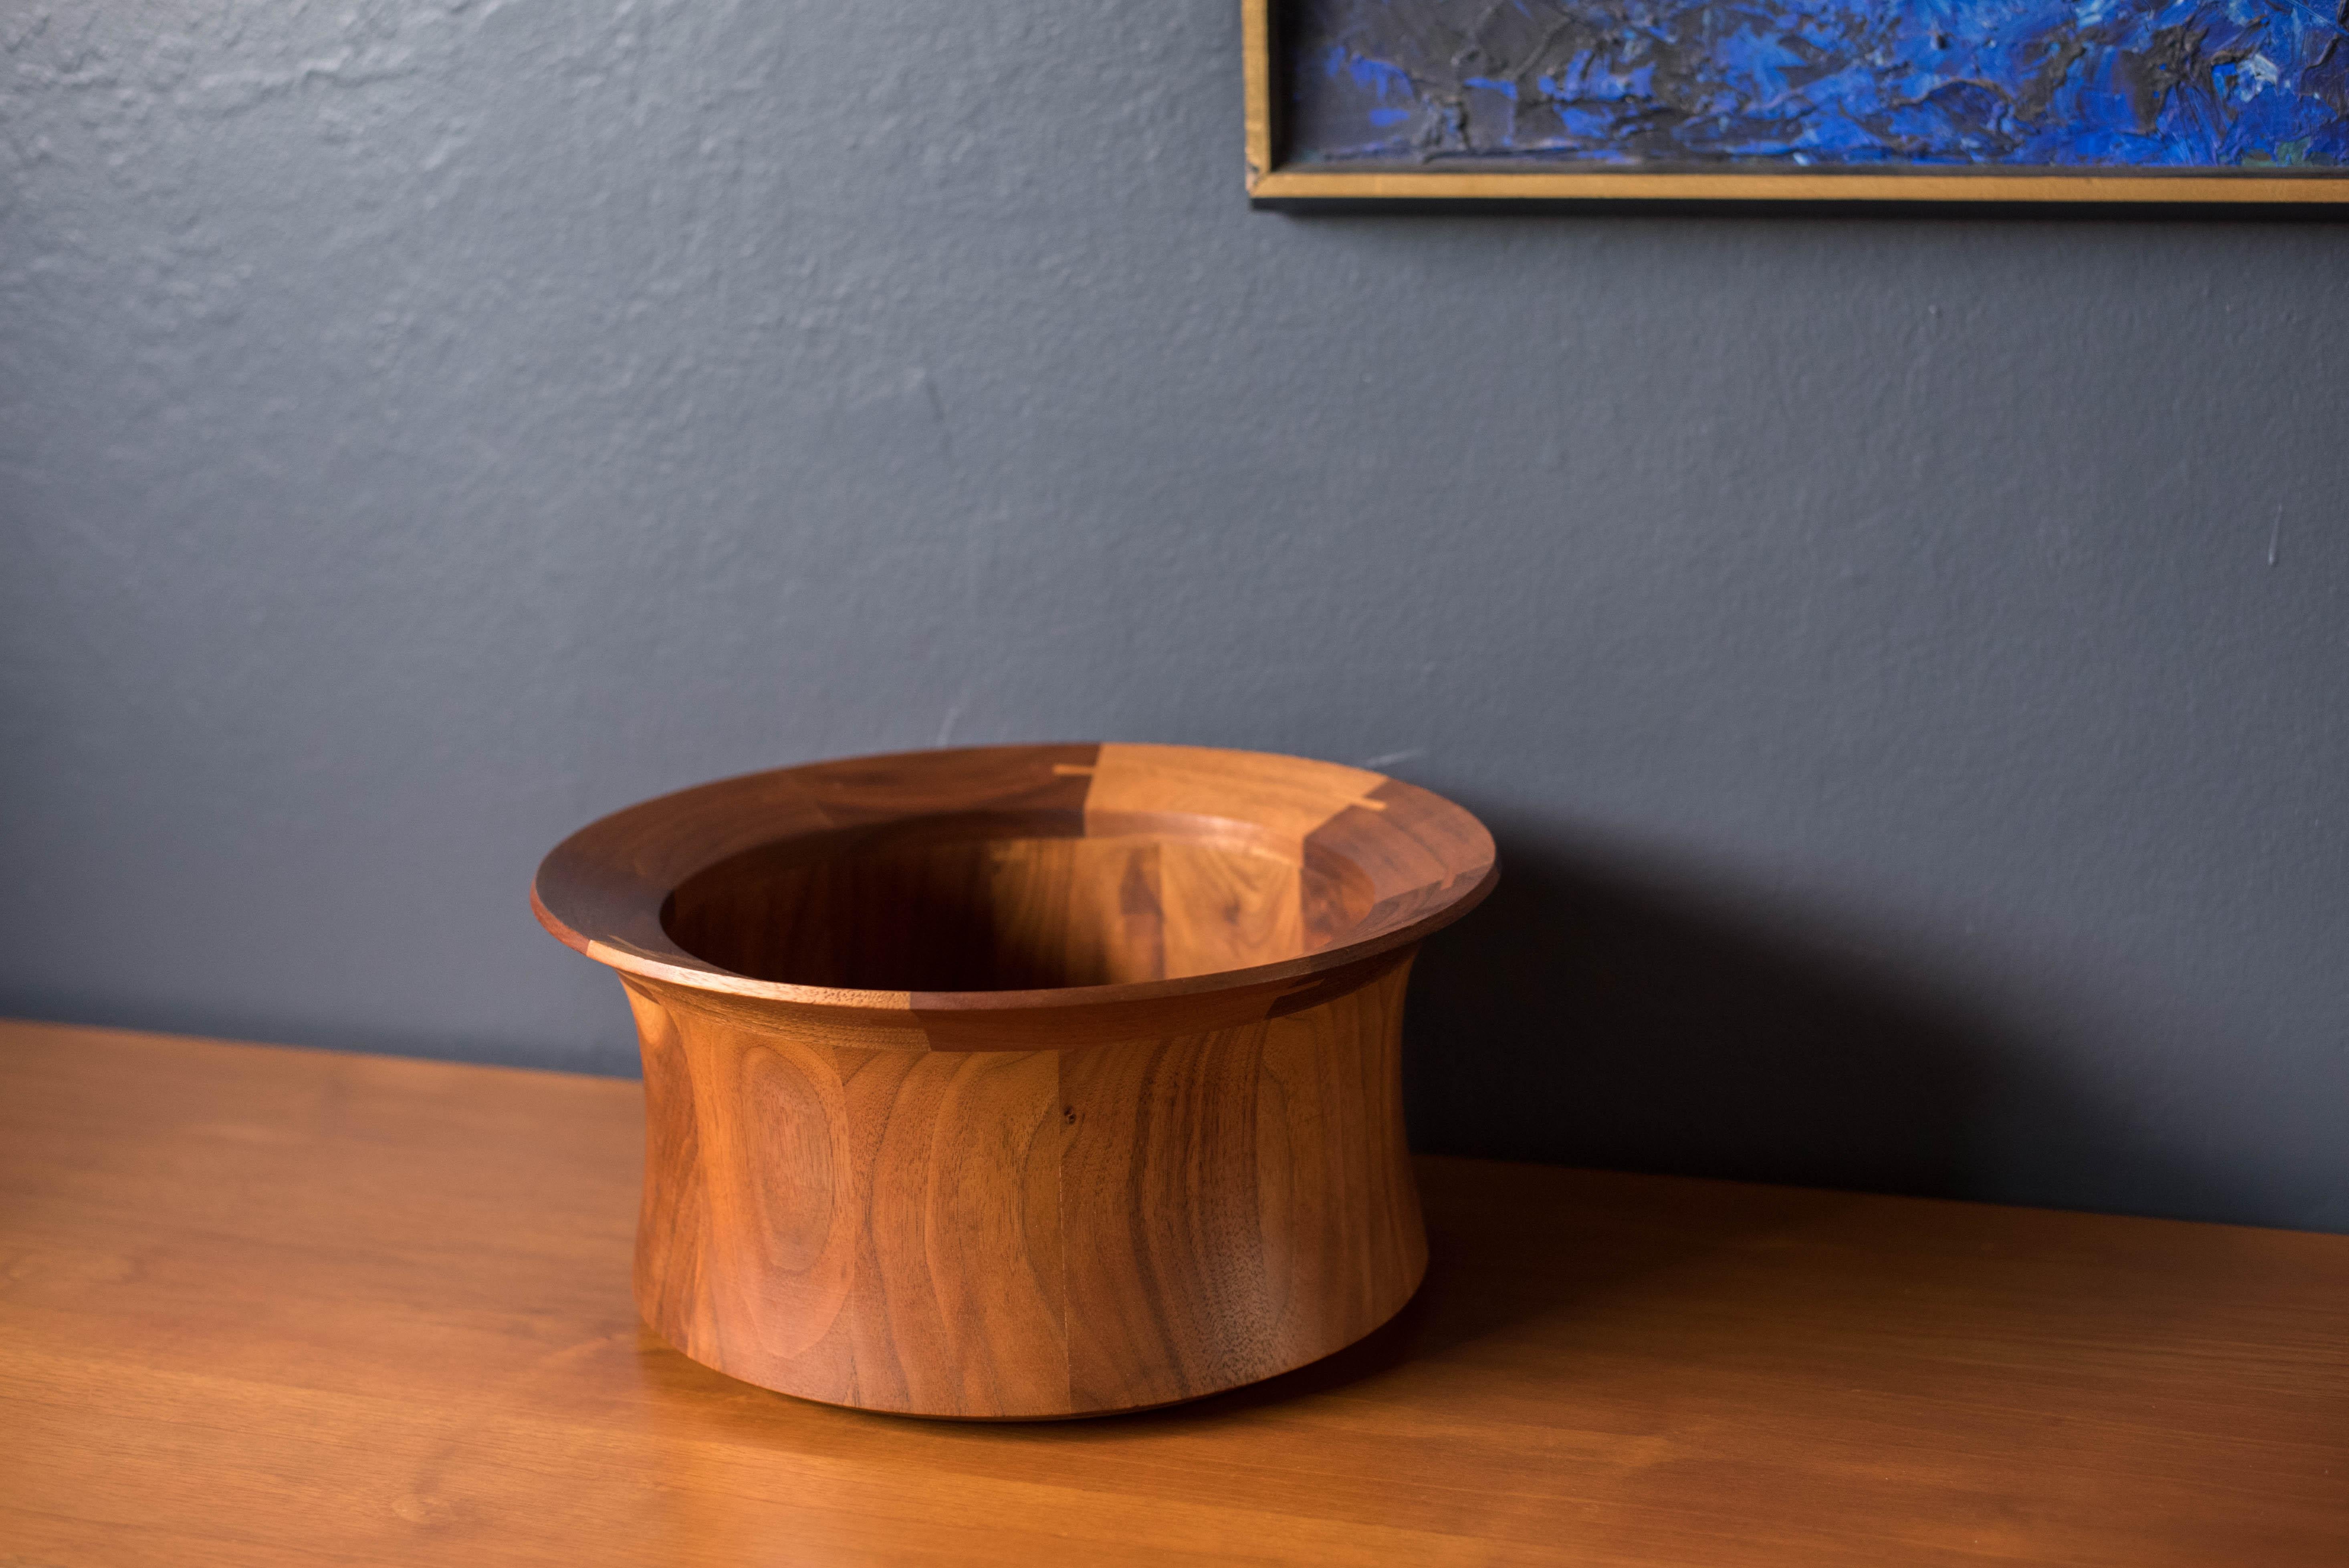 Vintage American designed walnut serving bowl circa 1950s. This sculptural modernist piece is handcrafted in staved solid walnut labeled 'designed wood' and distributed by Richards Morgenthau Co.





Offered by Mid Century Maddist